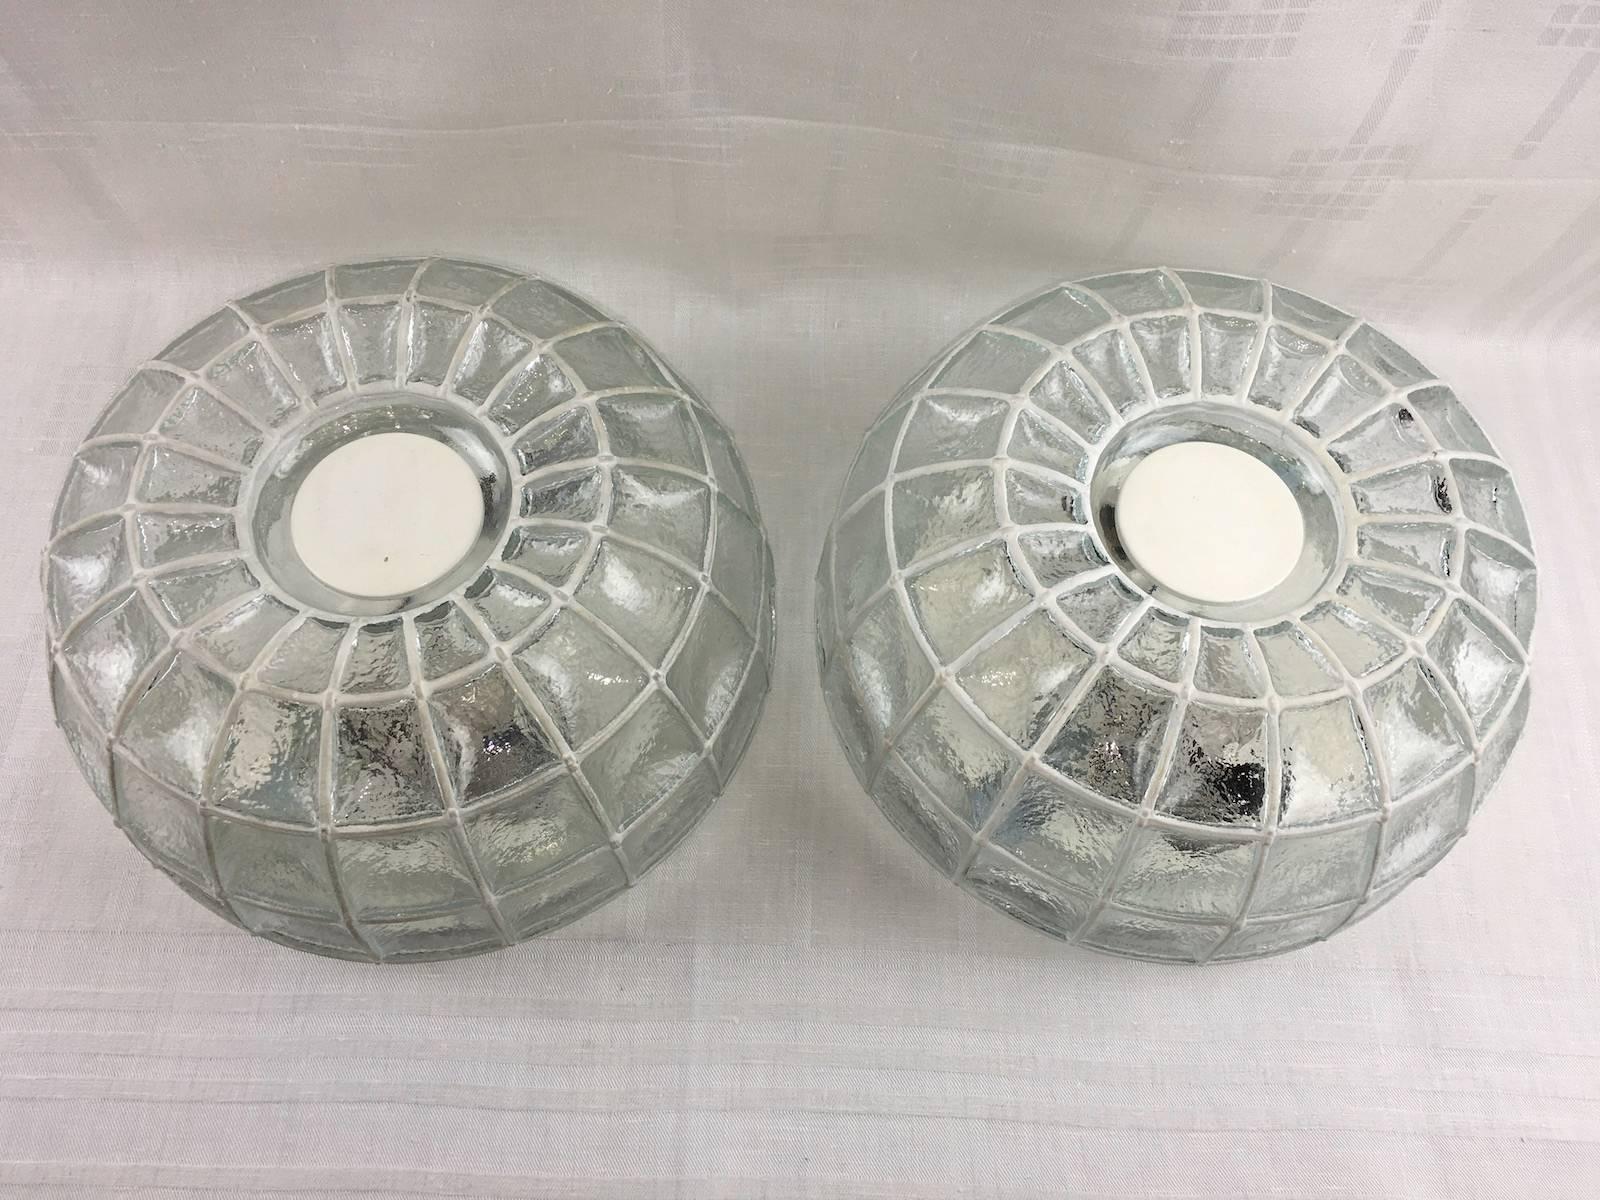 Pair of beautiful glass honeycomb ceiling fixture by Limburg, Germany. This light features a thick clear glass with white grid elements.
Takes two E27 base bulbs up to 60 wats per bulb.